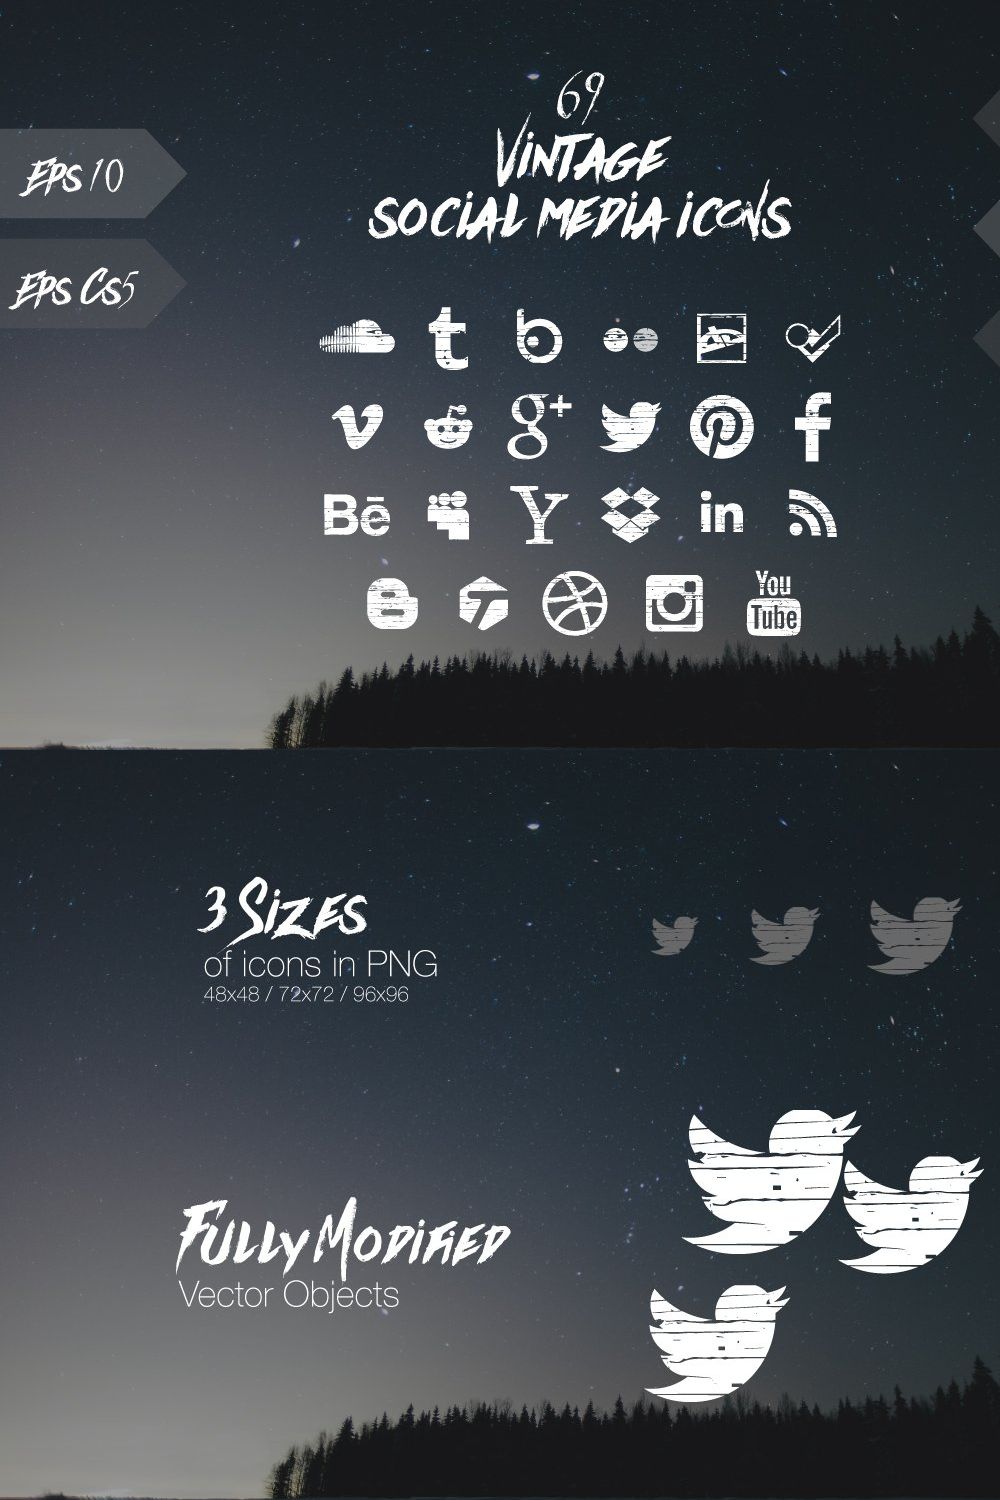 69 vintage social media icons pinterest preview image.